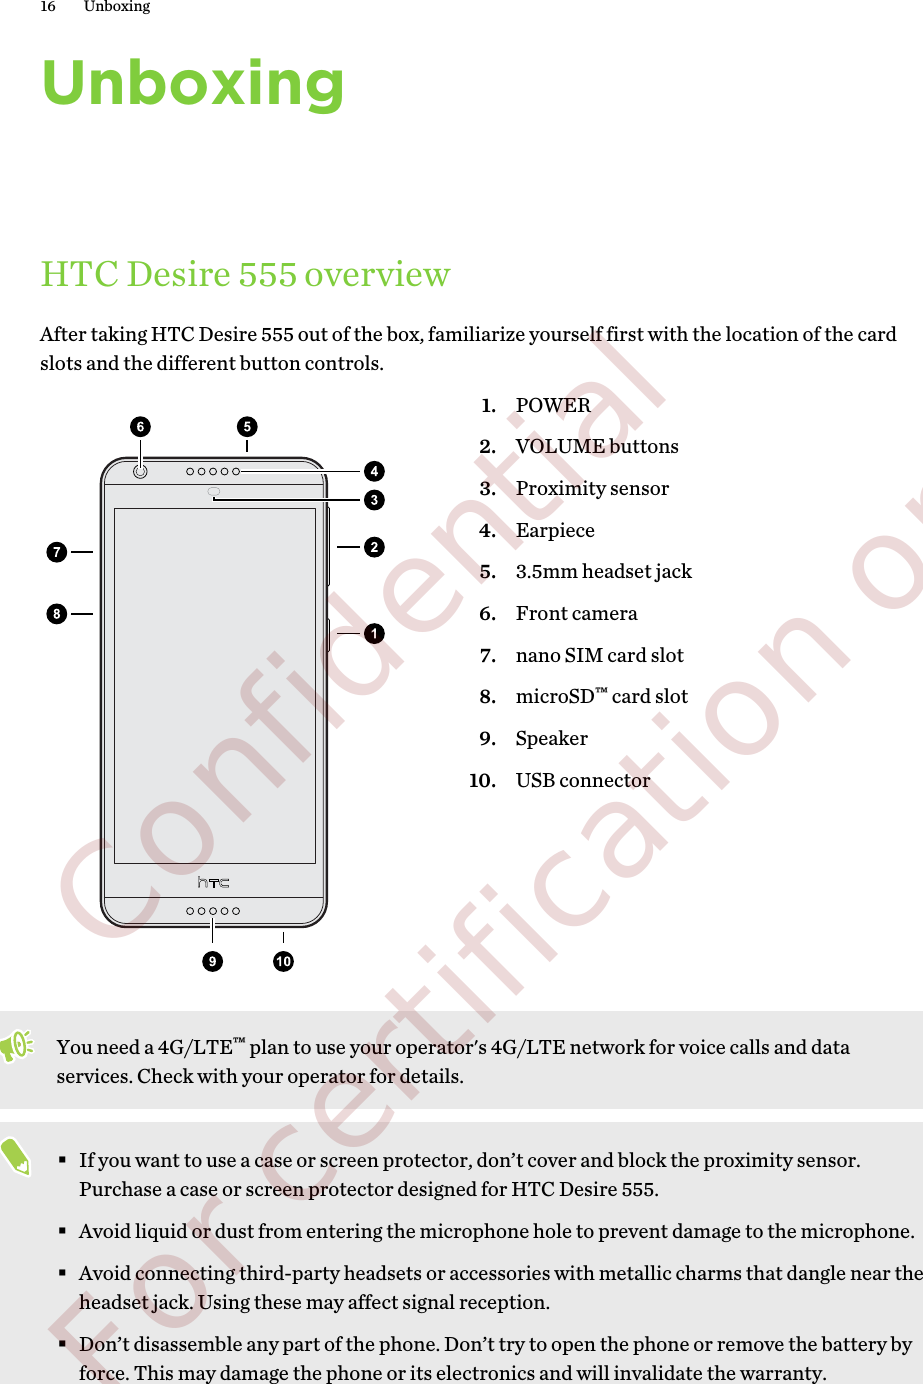 UnboxingHTC Desire 555 overviewAfter taking HTC Desire 555 out of the box, familiarize yourself first with the location of the cardslots and the different button controls.1. POWER2. VOLUME buttons3. Proximity sensor4. Earpiece5. 3.5mm headset jack6. Front camera7. nano SIM card slot8. microSD™ card slot9. Speaker10. USB connectorYou need a 4G/LTE™ plan to use your operator&apos;s 4G/LTE network for voice calls and dataservices. Check with your operator for details.§If you want to use a case or screen protector, don’t cover and block the proximity sensor.Purchase a case or screen protector designed for HTC Desire 555.§Avoid liquid or dust from entering the microphone hole to prevent damage to the microphone.§Avoid connecting third-party headsets or accessories with metallic charms that dangle near theheadset jack. Using these may affect signal reception.§Don’t disassemble any part of the phone. Don’t try to open the phone or remove the battery byforce. This may damage the phone or its electronics and will invalidate the warranty.16 Unboxing        Confidential  For certification only